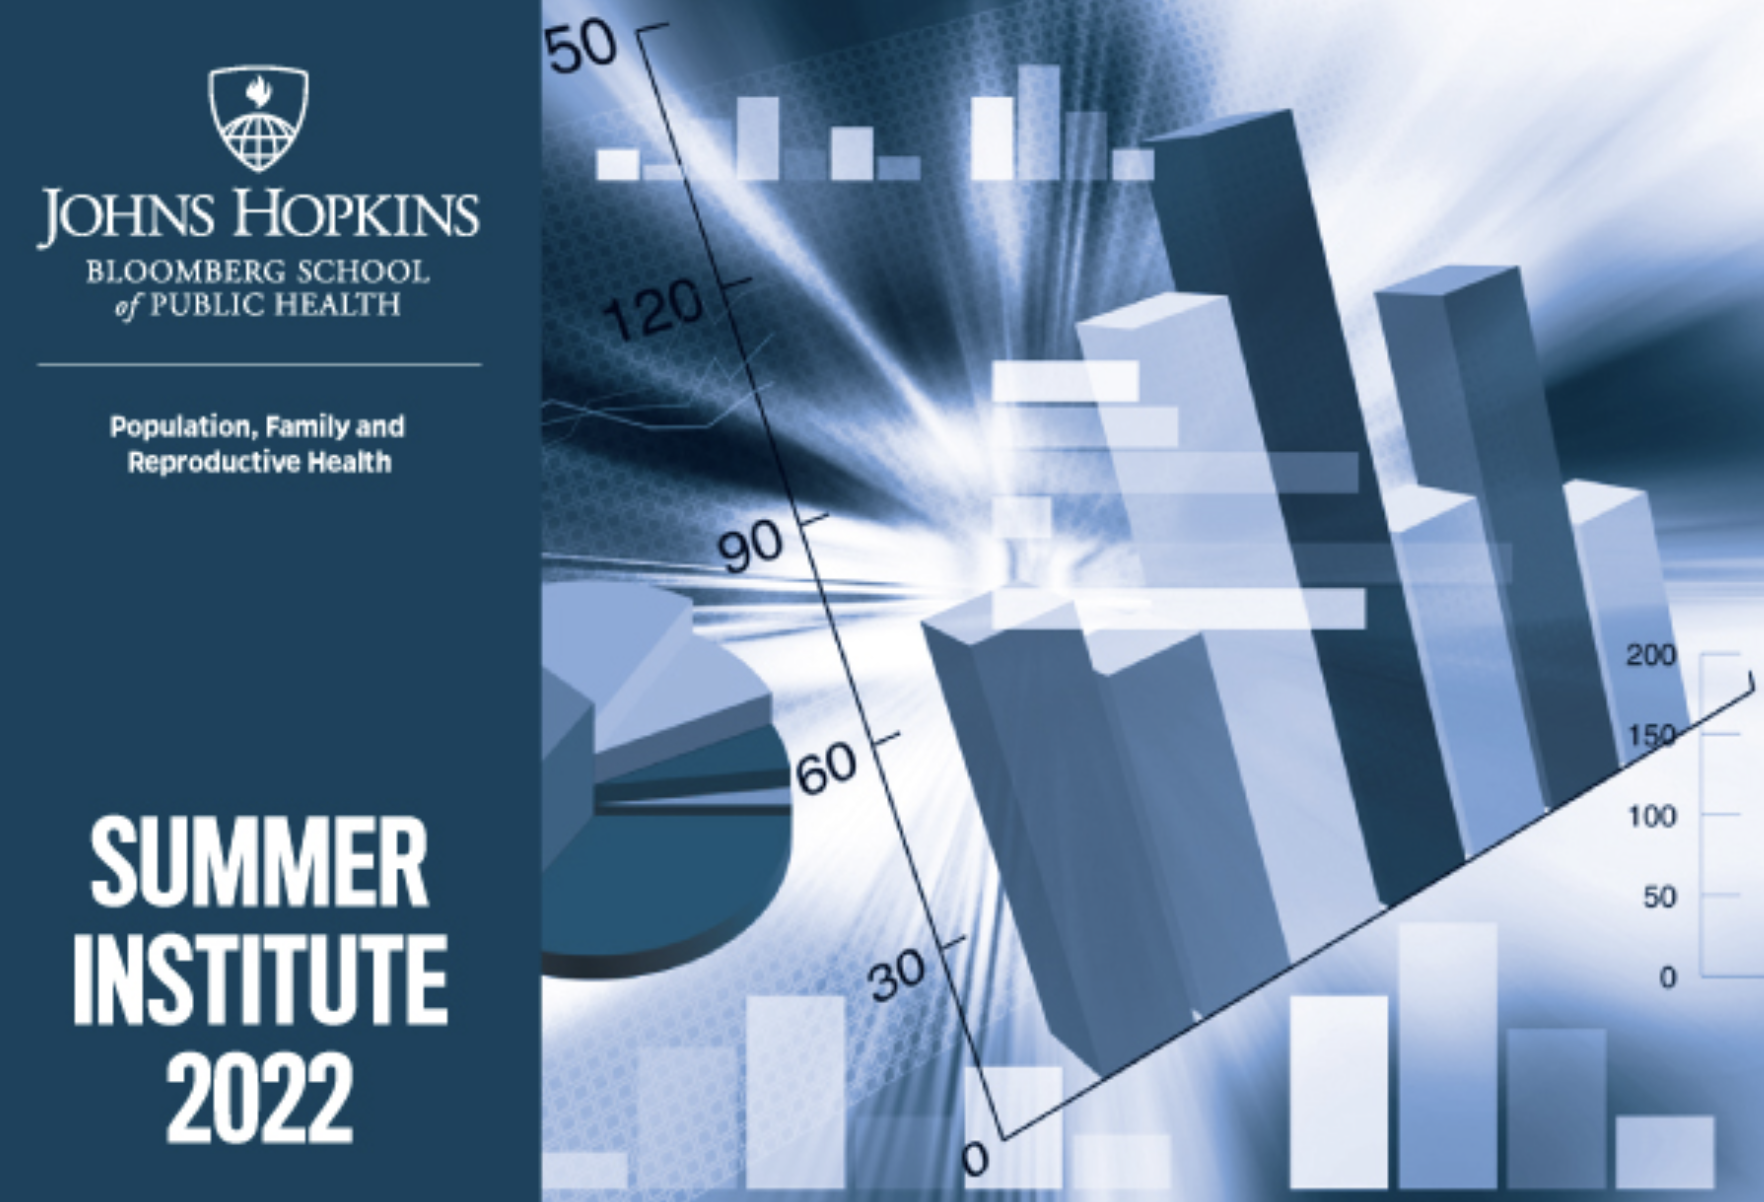 Summer Institute 2022: Data to Policy in Population, Family and Reproductive Health